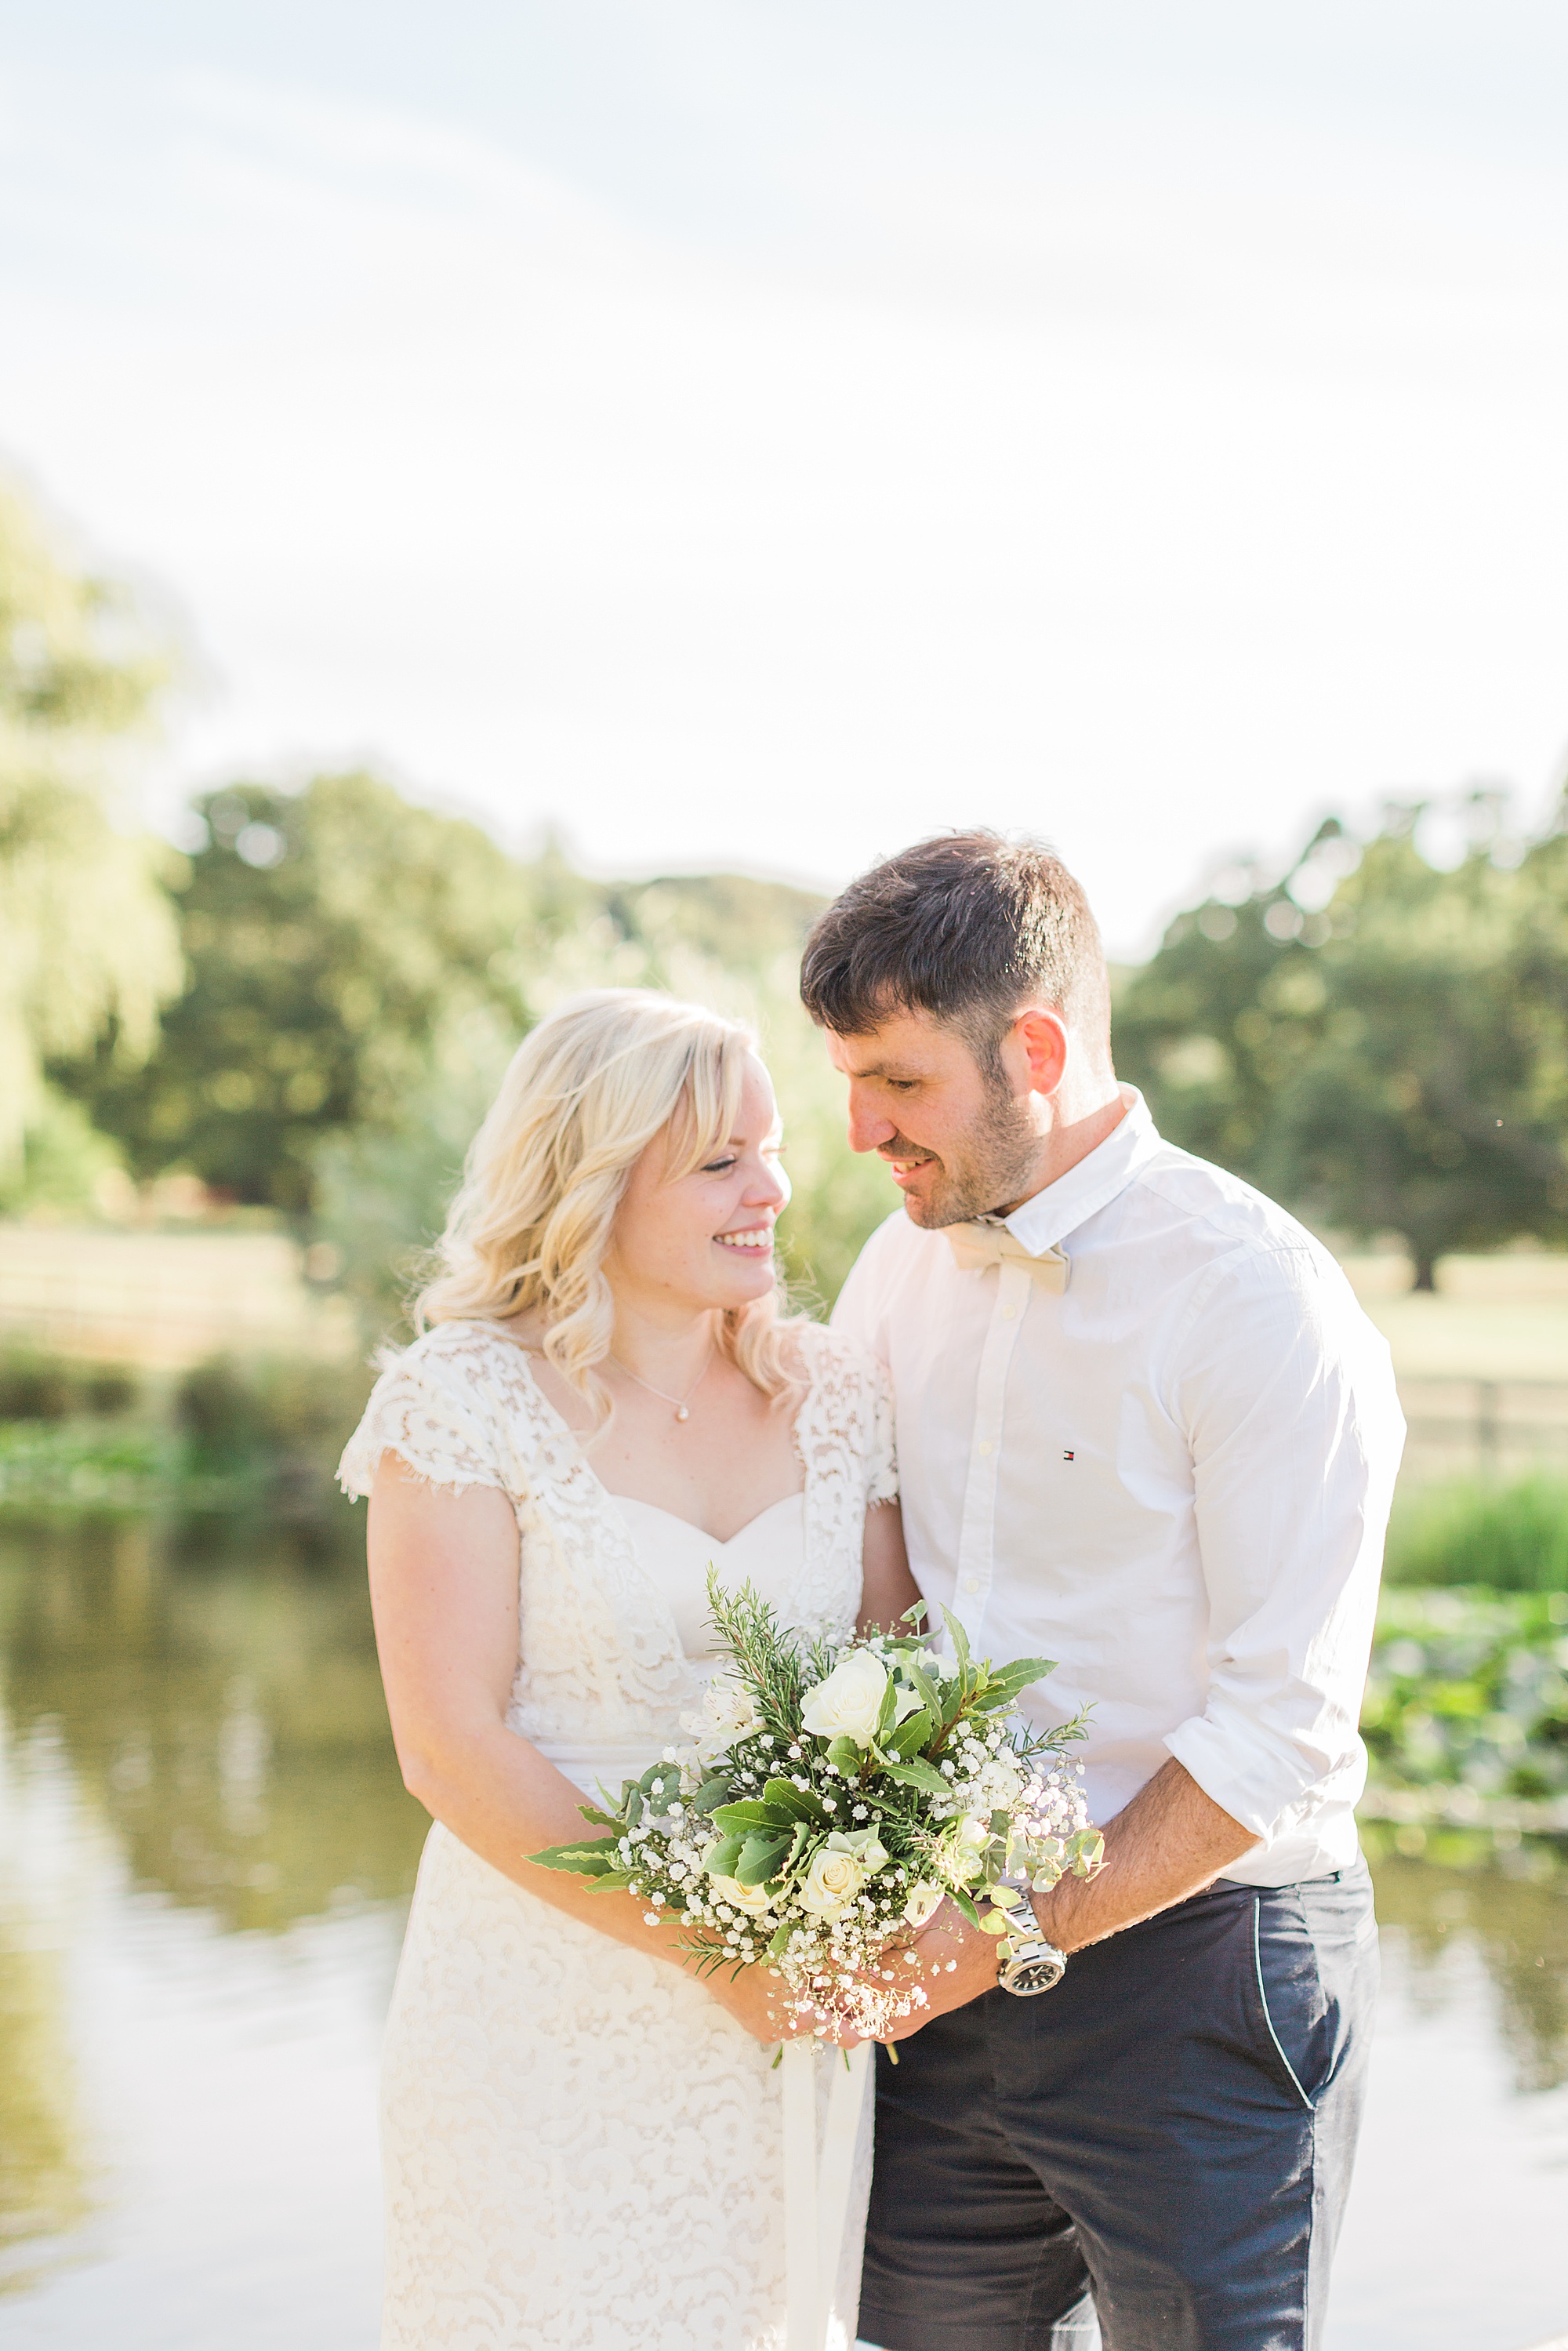 photo of a bride in a lace dress and groom wearing shirts and shorts stood embraced in towards each other holding the bride's bouquet with a lake in the background